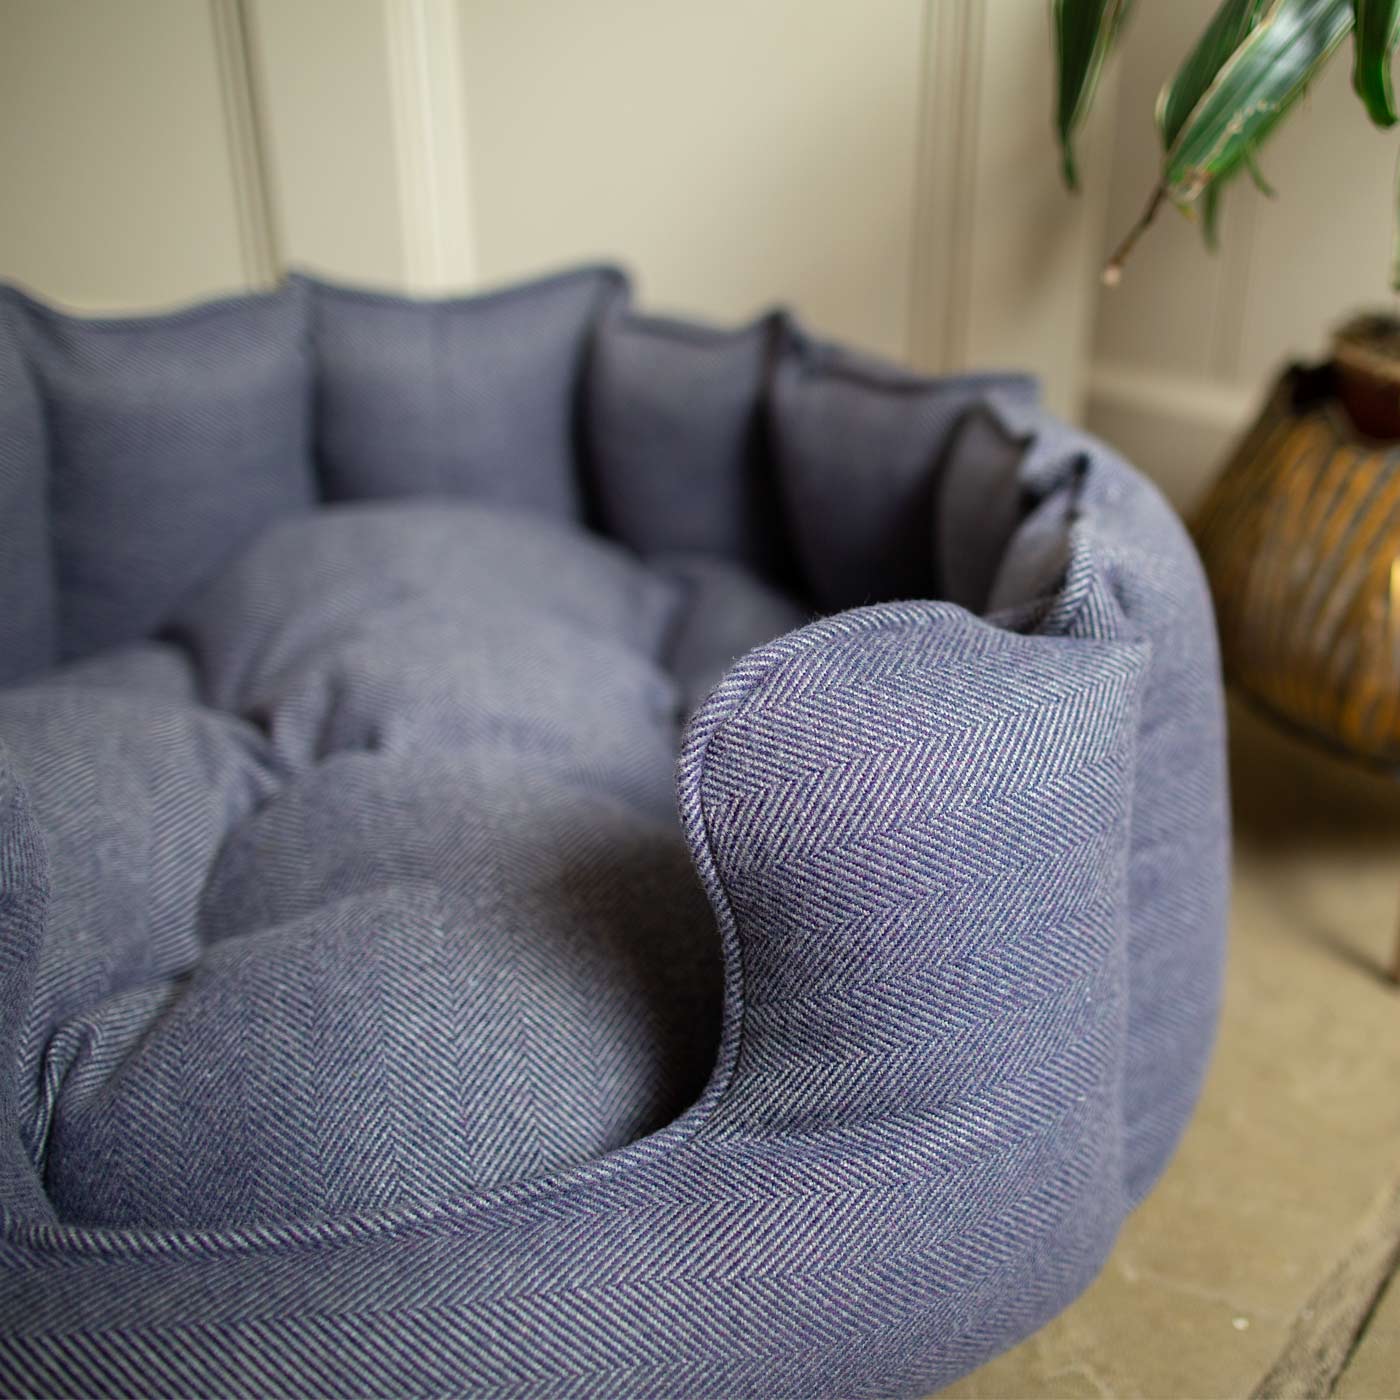 Discover Our Luxurious High Wall Bed For Cats, Featuring inner pillow with plush teddy fleece on one side To Craft The Perfect Cat Bed In Stunning Oxford Herringbone Tweed! Available To Personalise Now at Lords & Labradors 